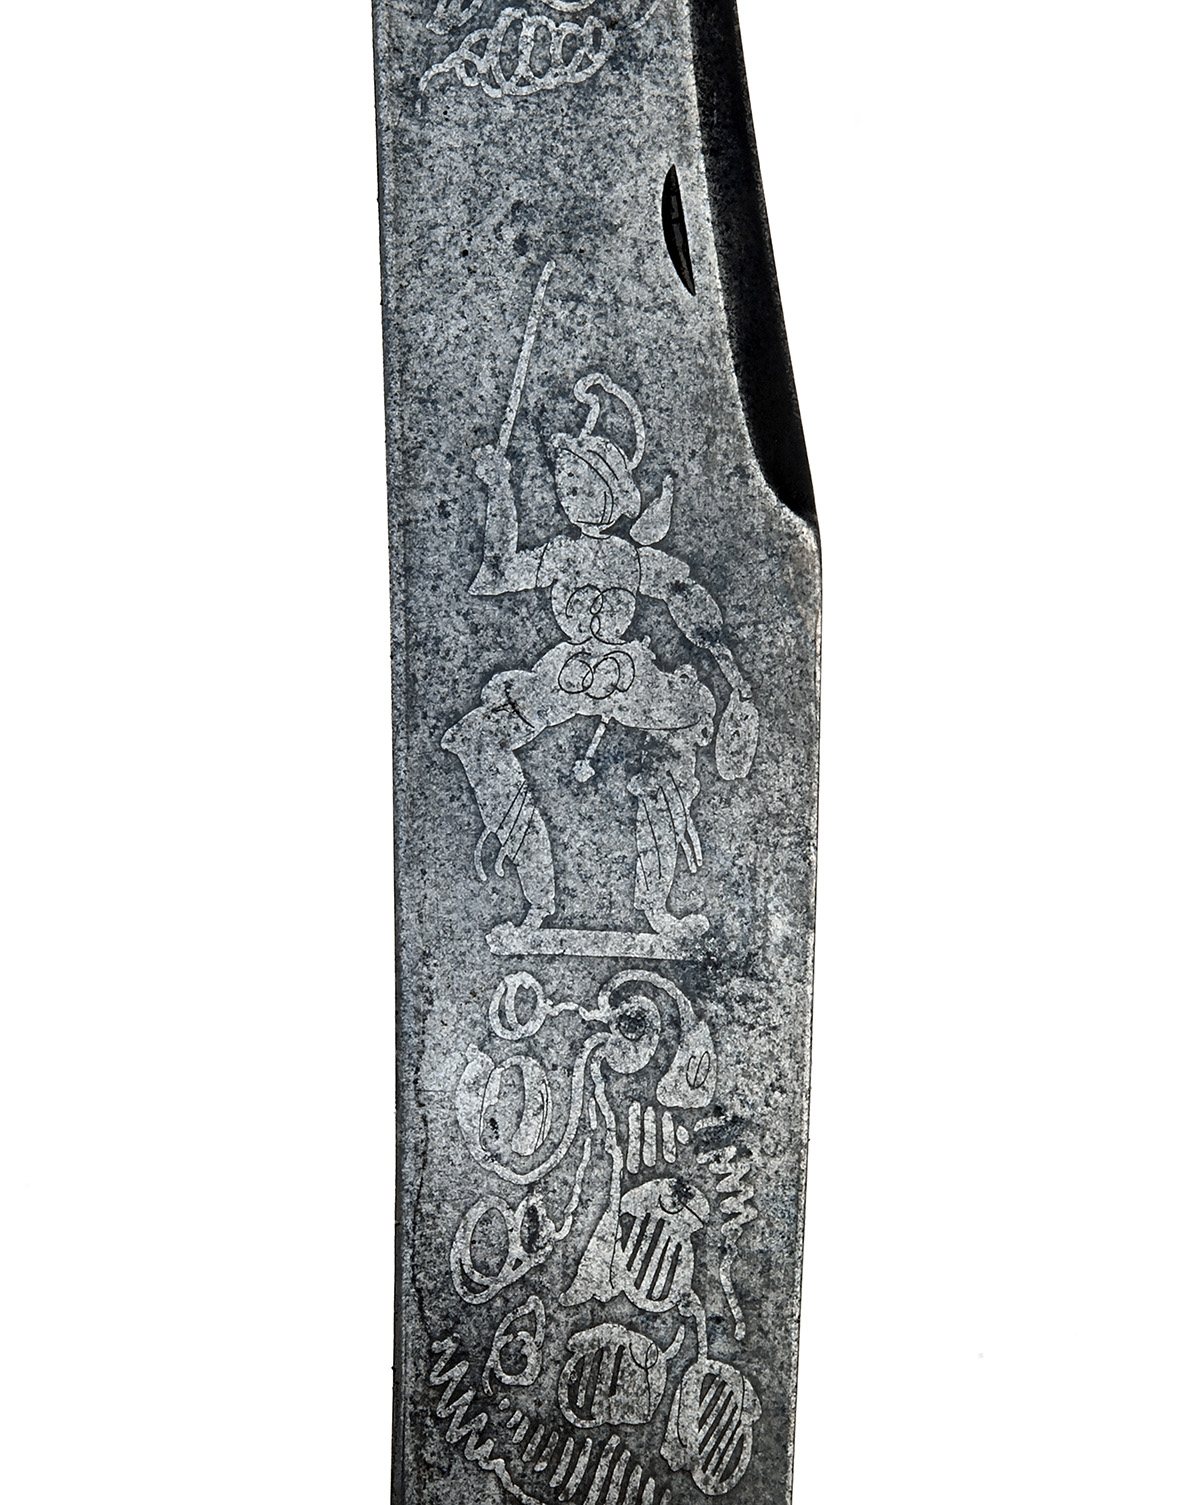 A LARGE ITALIAN FOLDING-KNIFE WITH IVORY AND MOTHER OF PEARL SCALES Sicilian, late 19th century, - Image 3 of 3